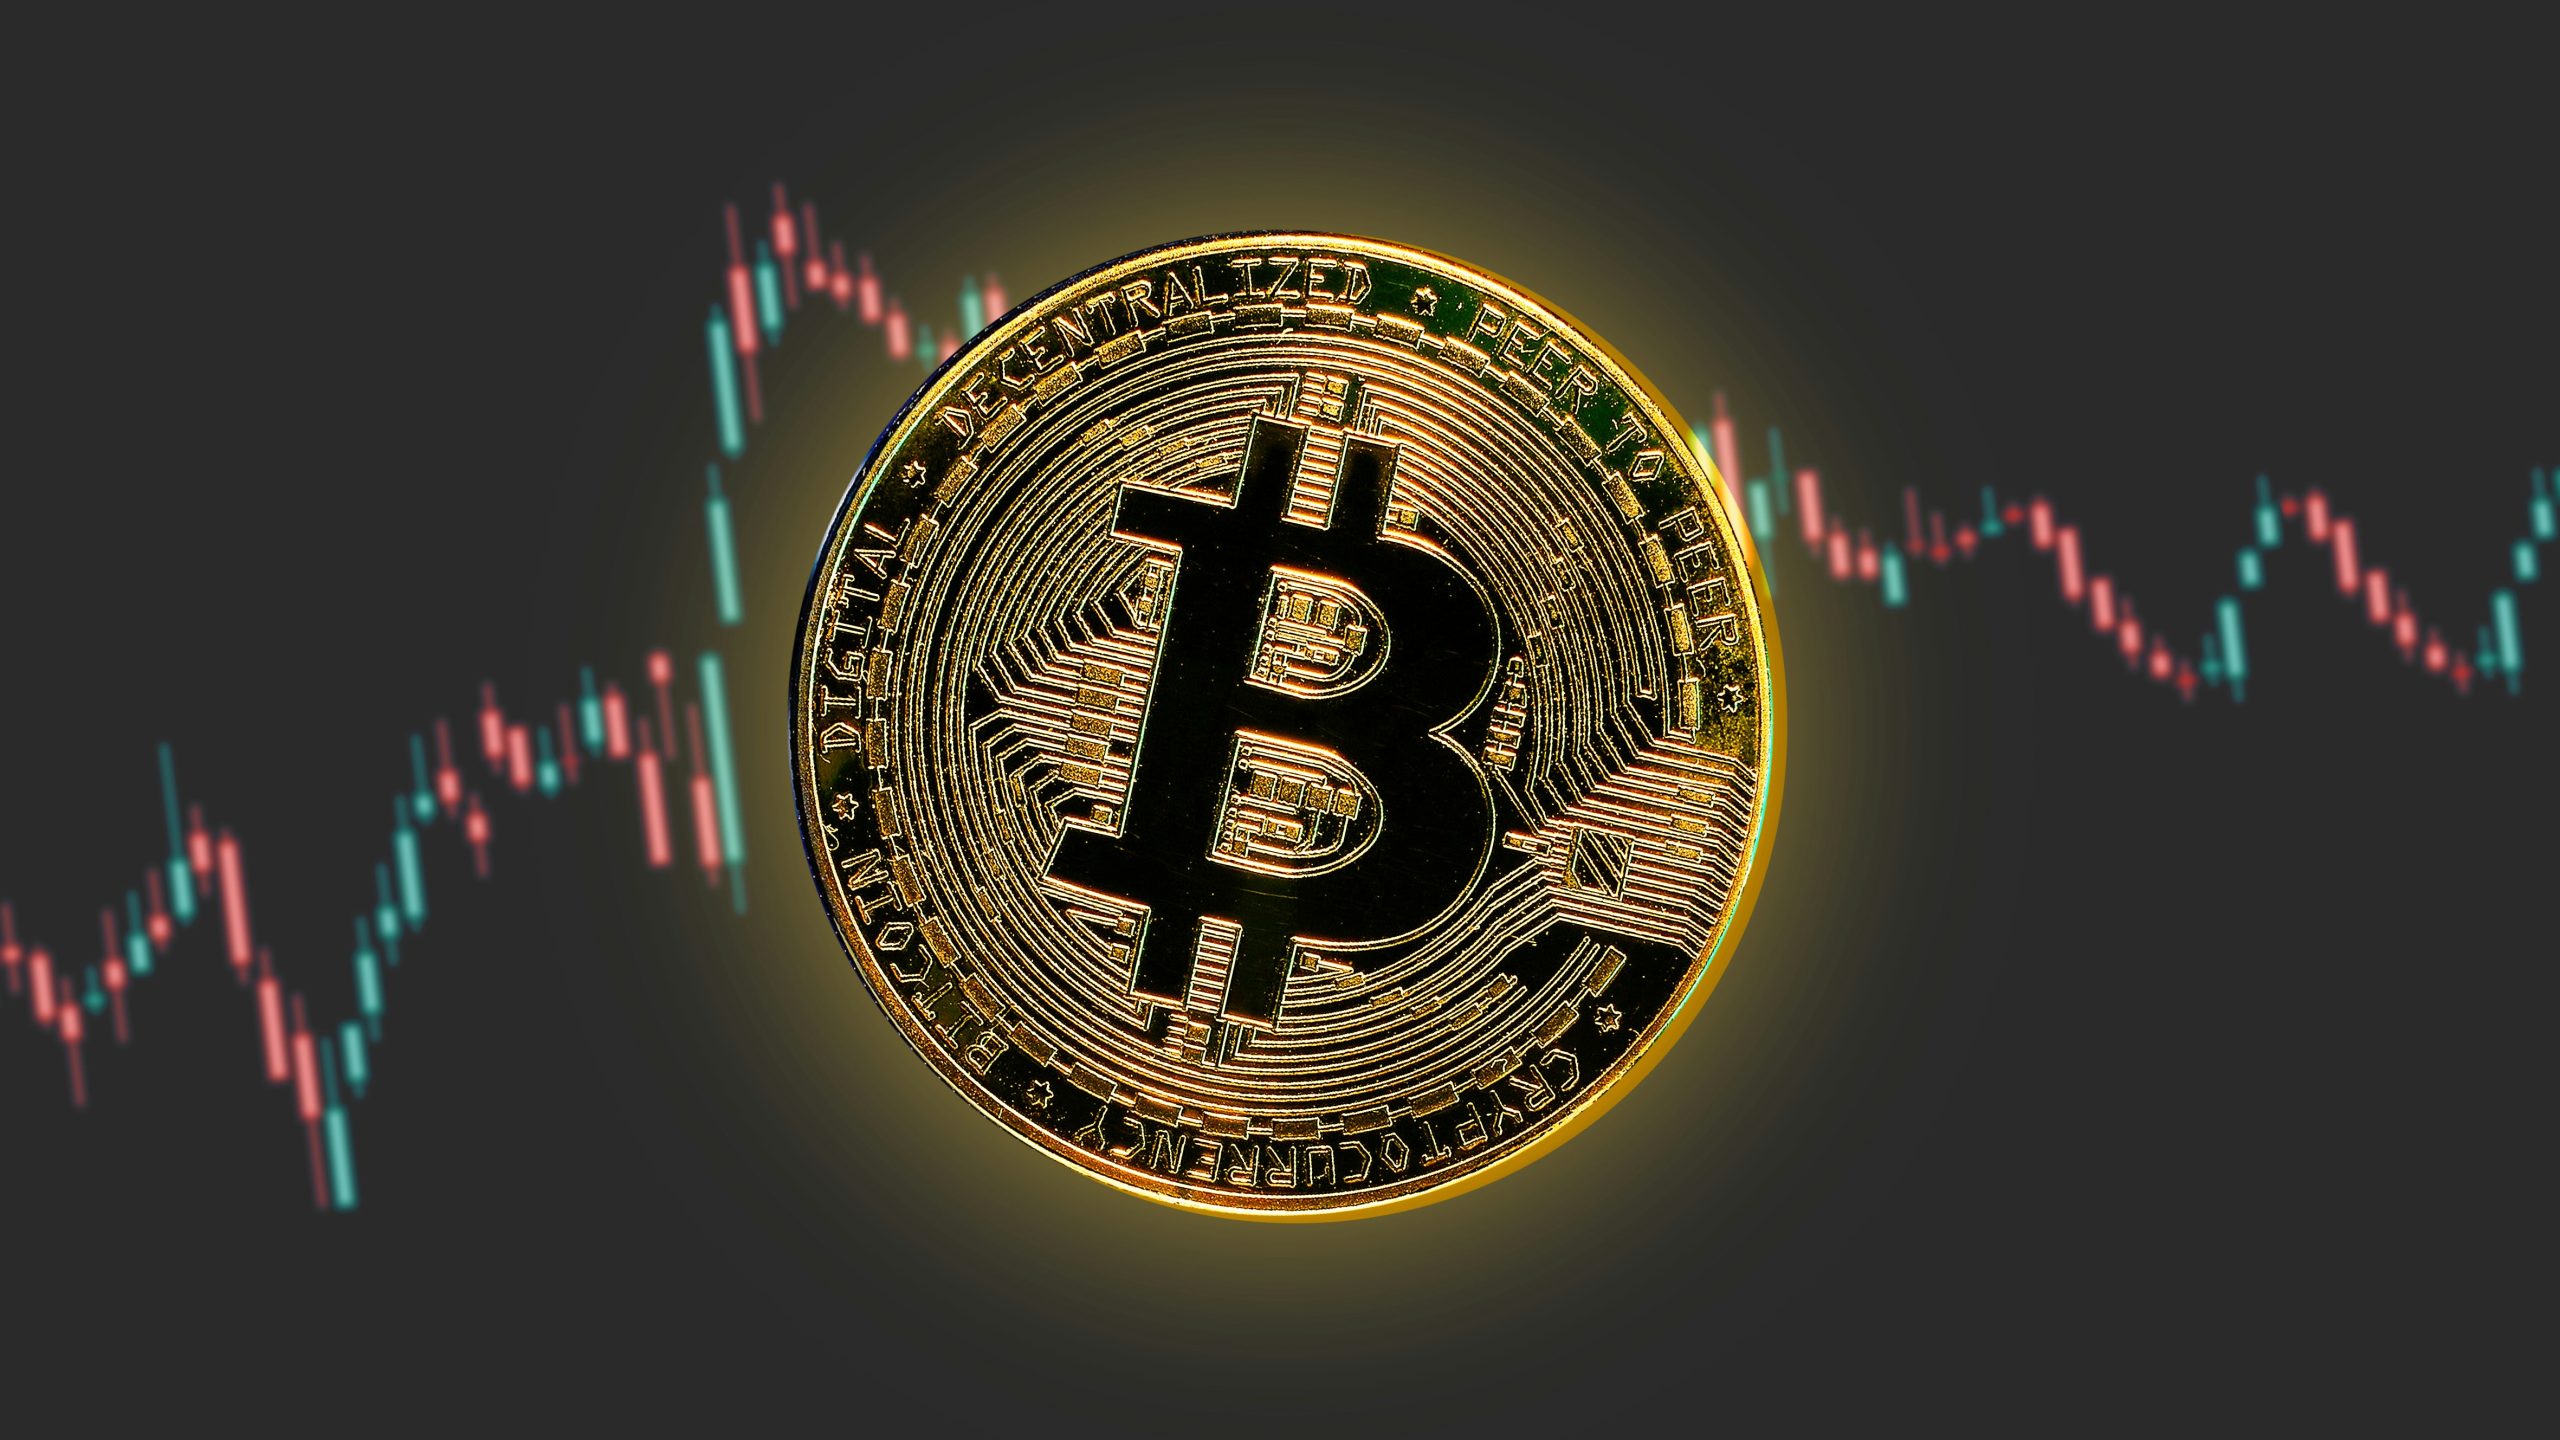 Why is Bitcoin Down Today? As retail investors concerns around BTC price grow, could Bitcoin ETF inflows explain why BTC is down?